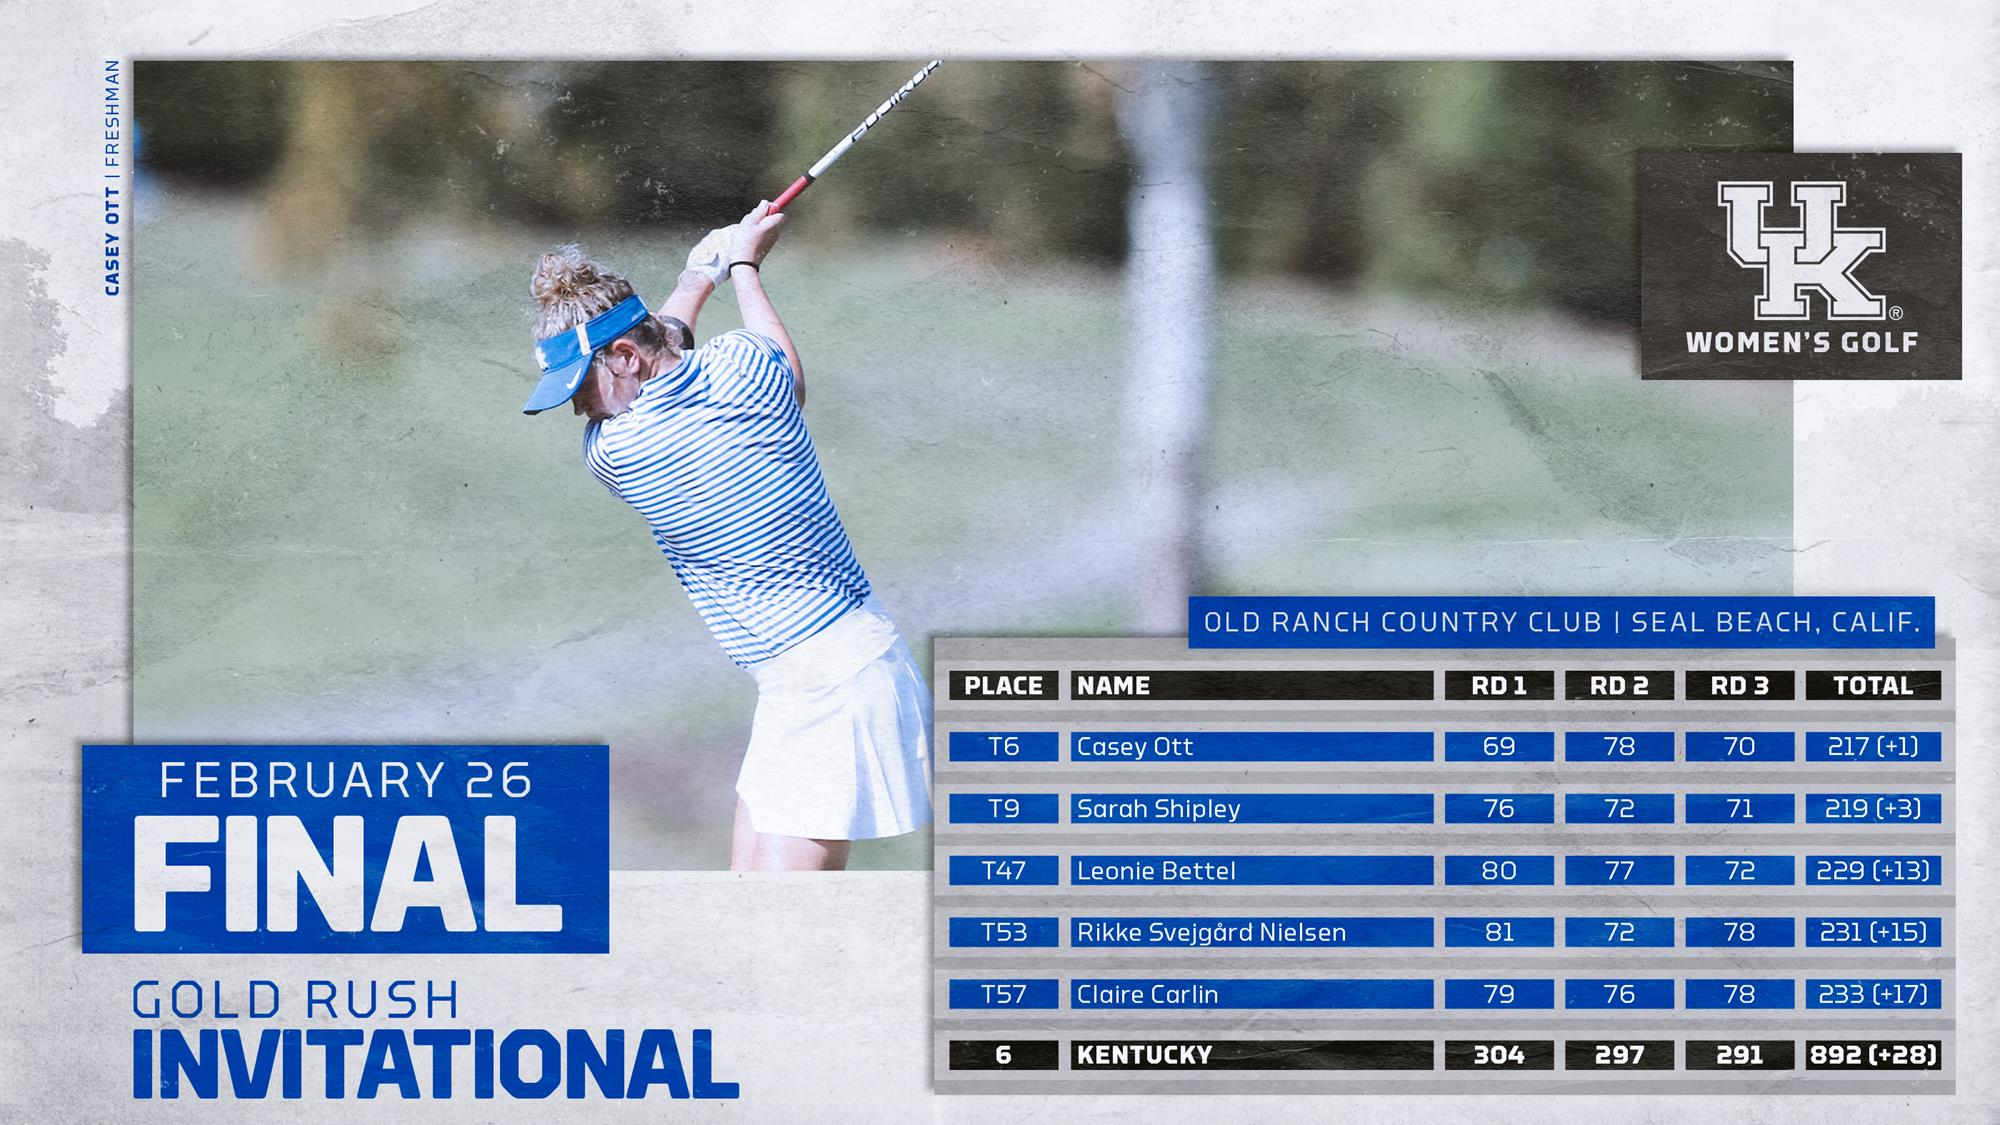 Ott, Shipley Lead UK Women’s Golf Charge up the Gold Rush Leaderboard